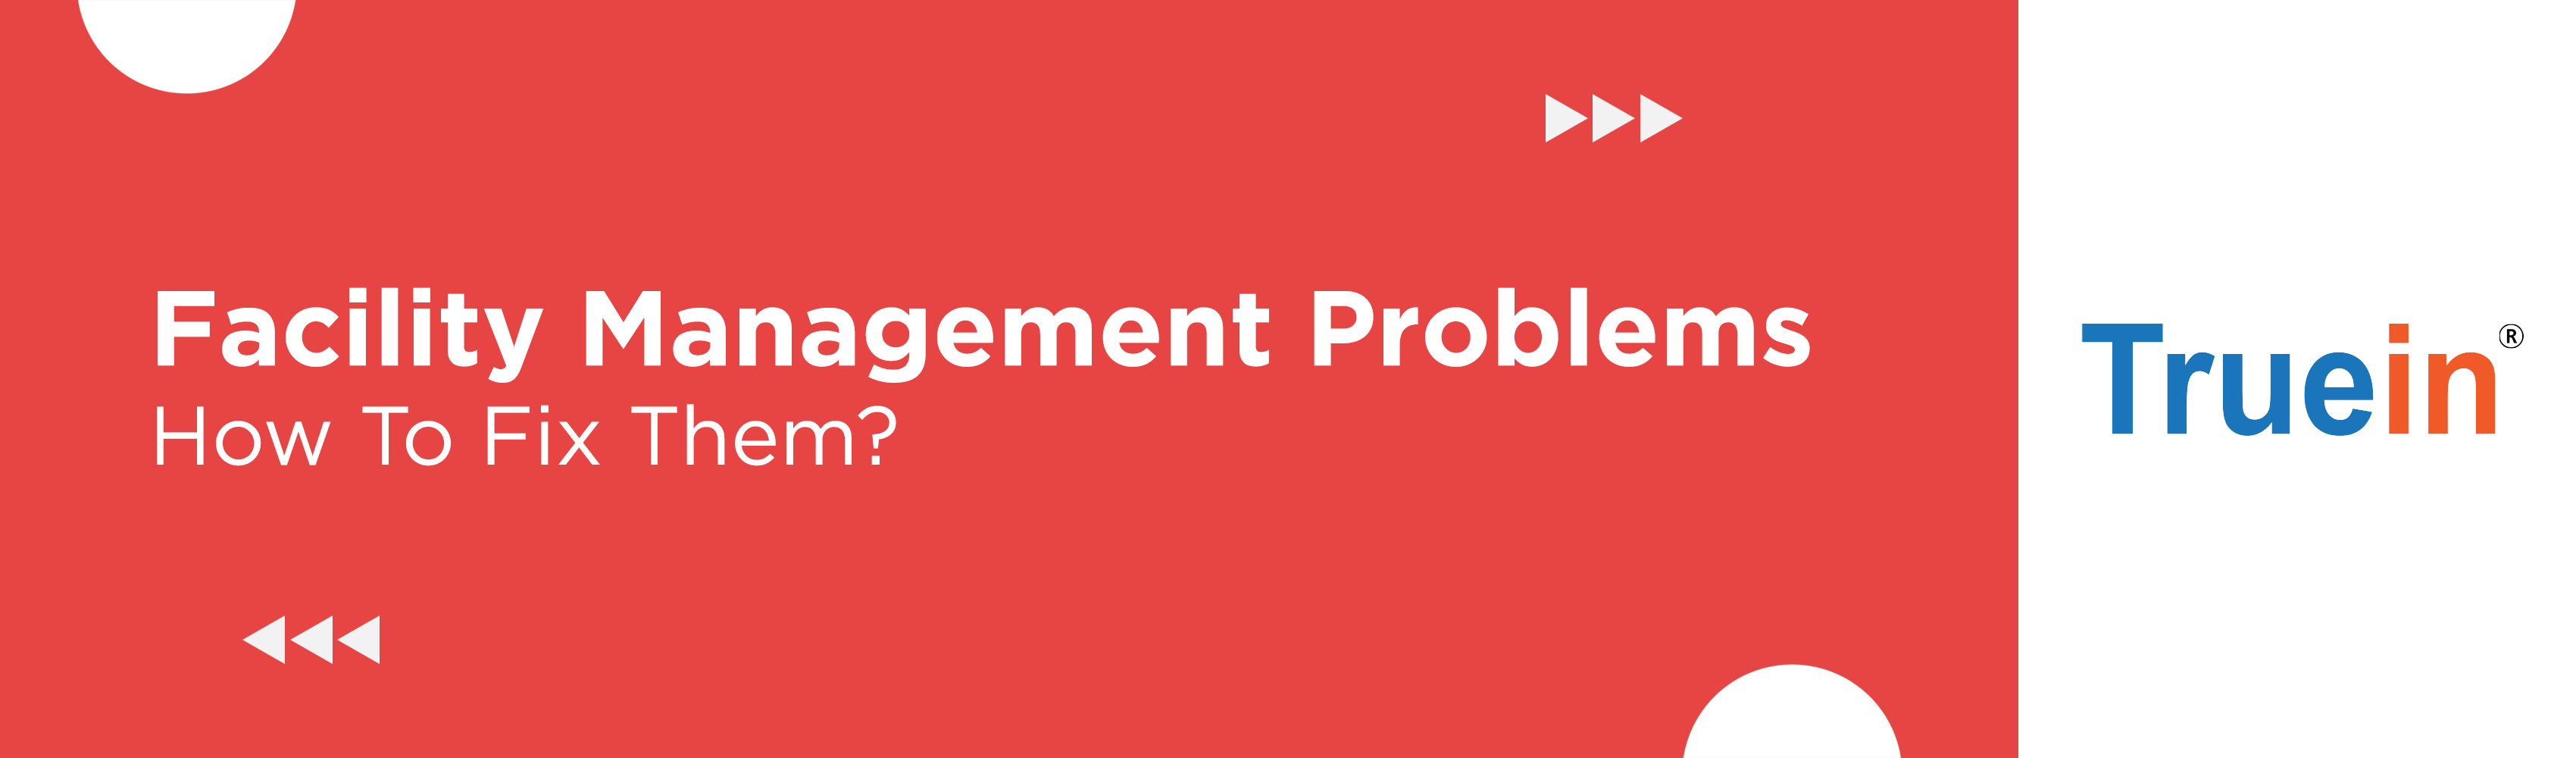 5 Facility Management Problems and How To Fix Them